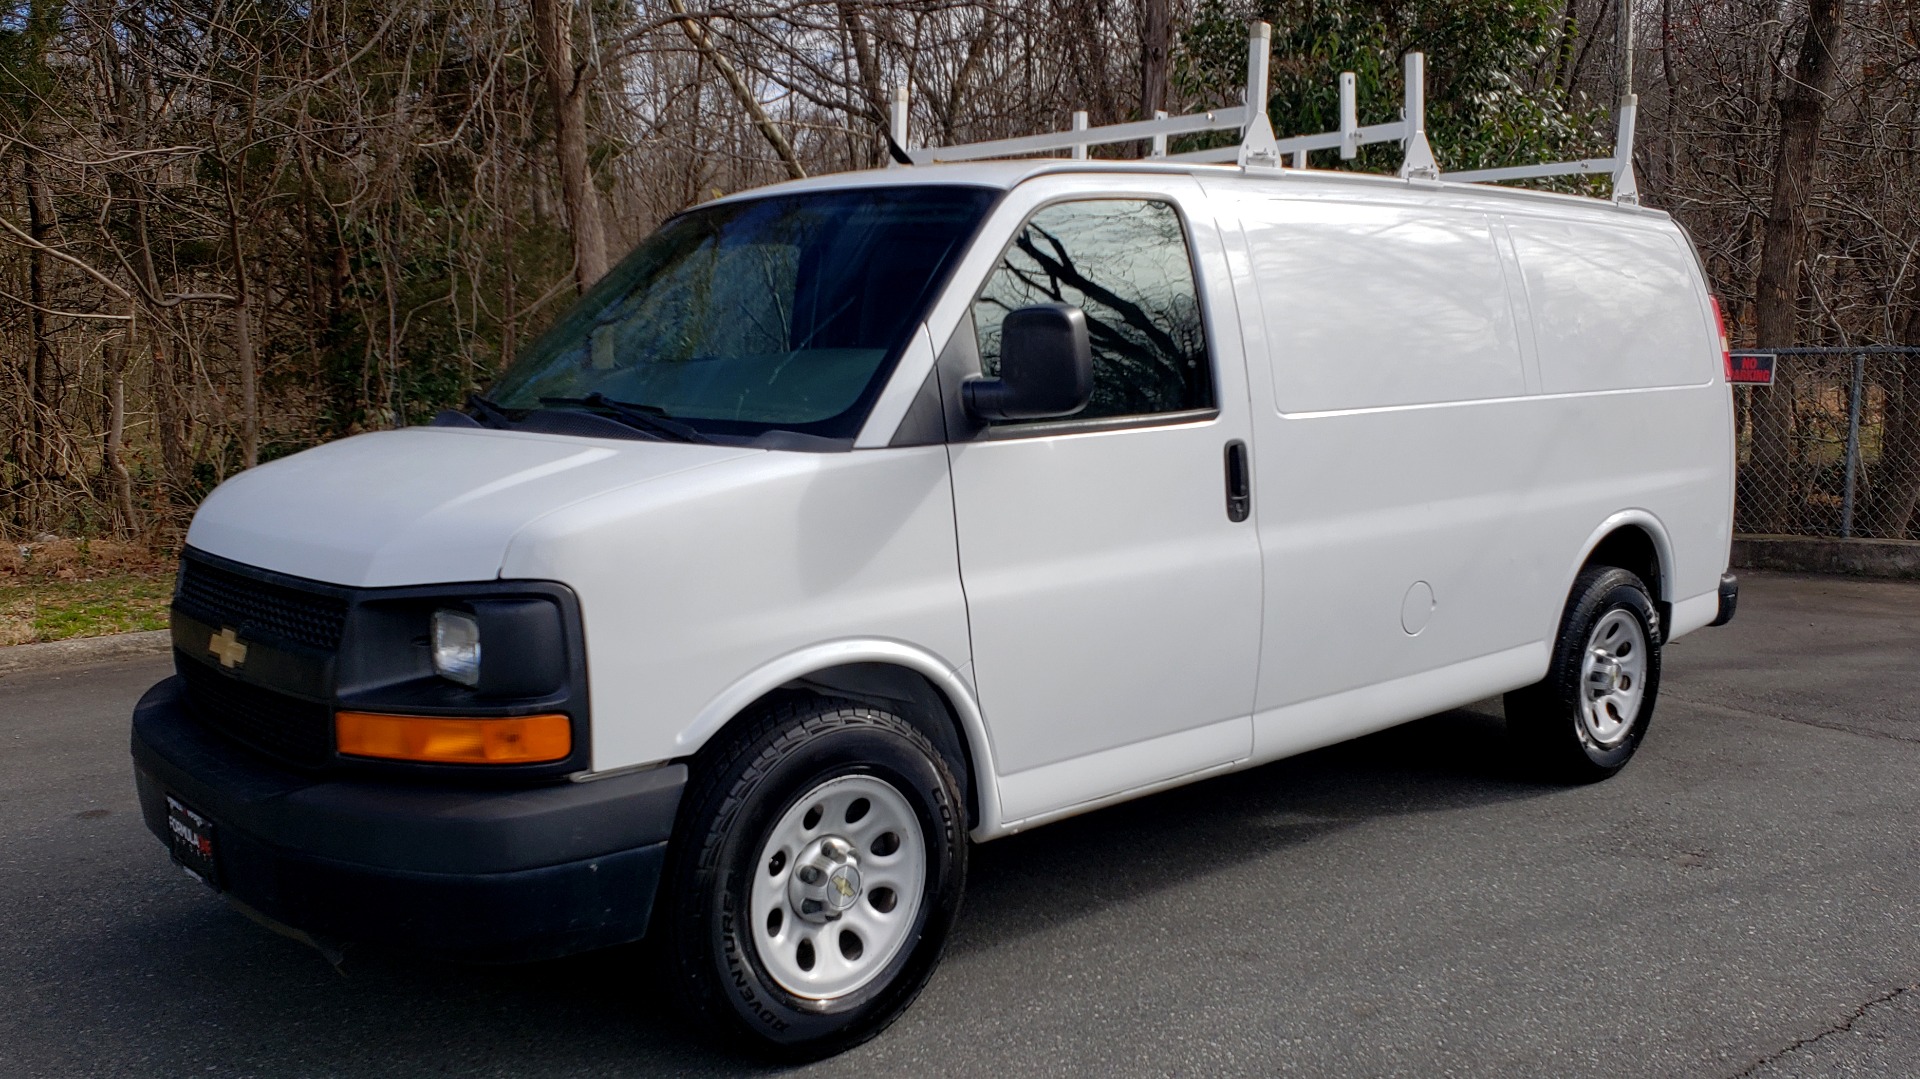 Used 2012 Chevrolet EXPRESS CARGO VAN 1500 / 135 WB / 4.3L V6 / 4-SPD AUTO  / ROOF RACK For Sale ($10,995) | Formula Imports Stock #FC10942